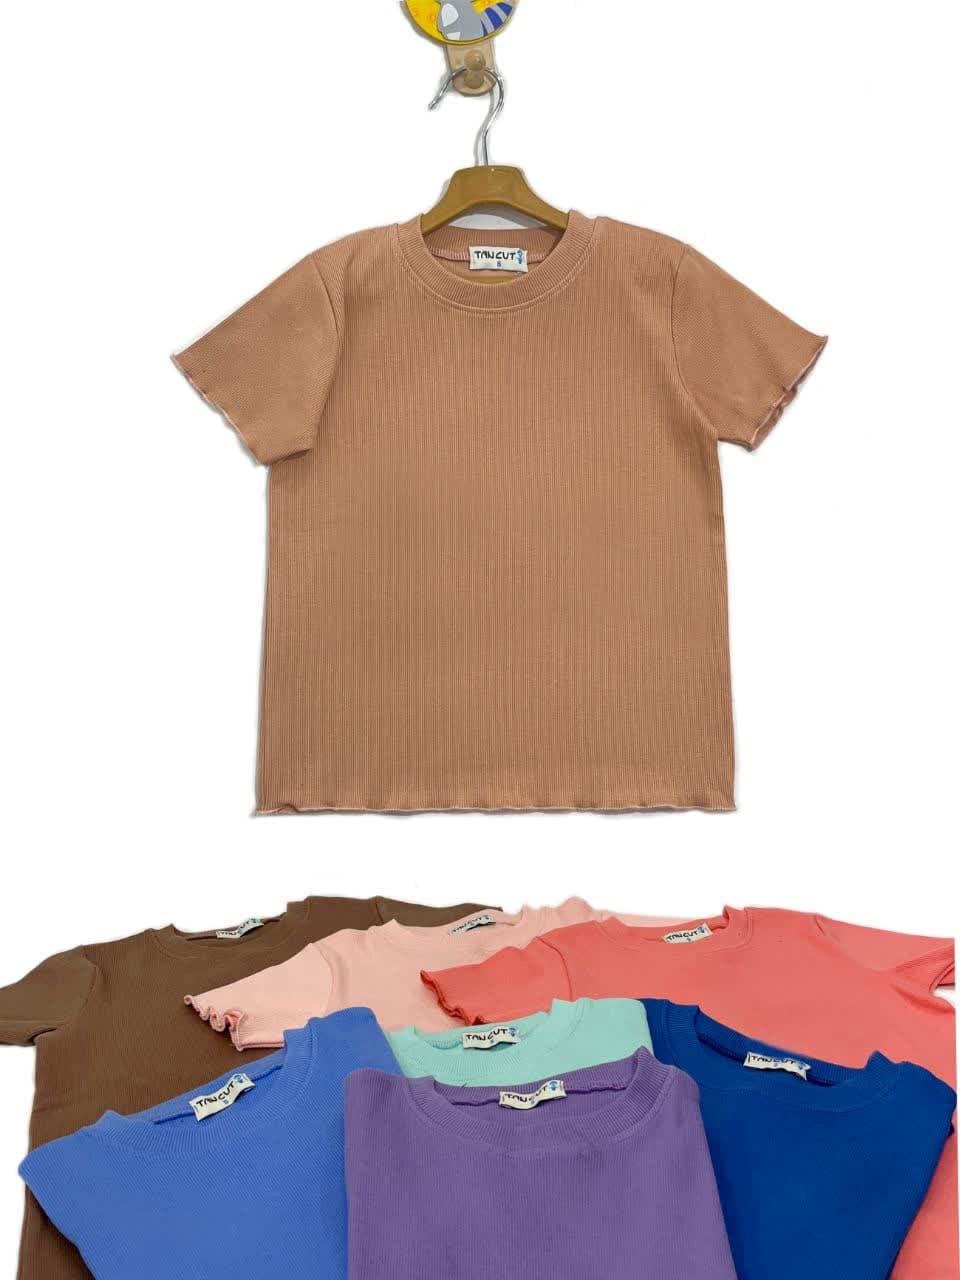 Colored t-shirt for girls